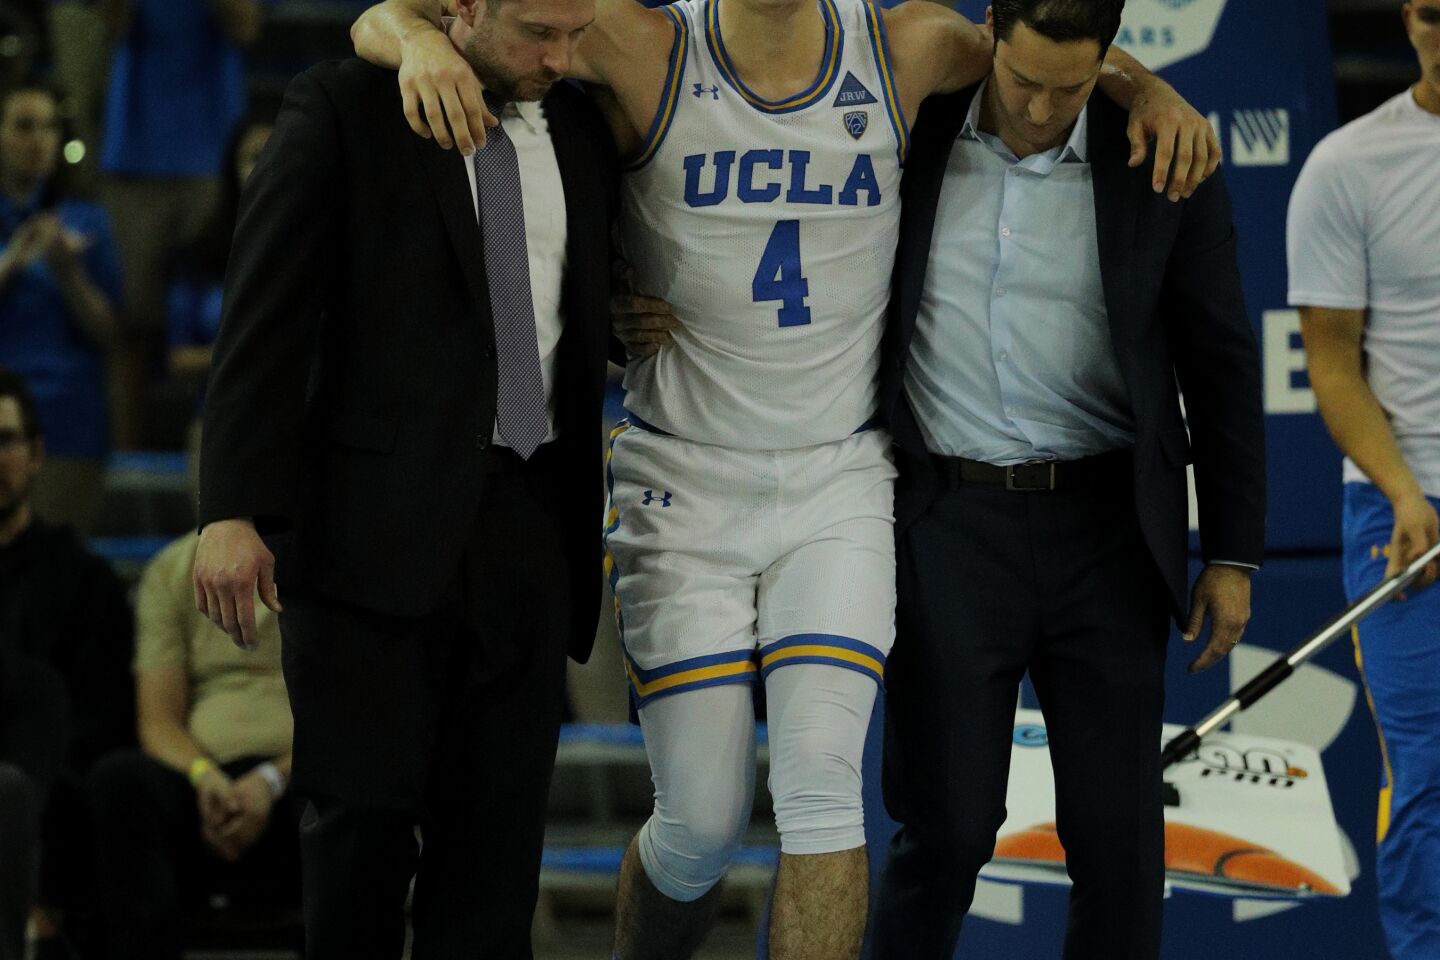 Bruins guard Jaime Jaquez Jr. is helped off the court after injuring a leg during the second half.